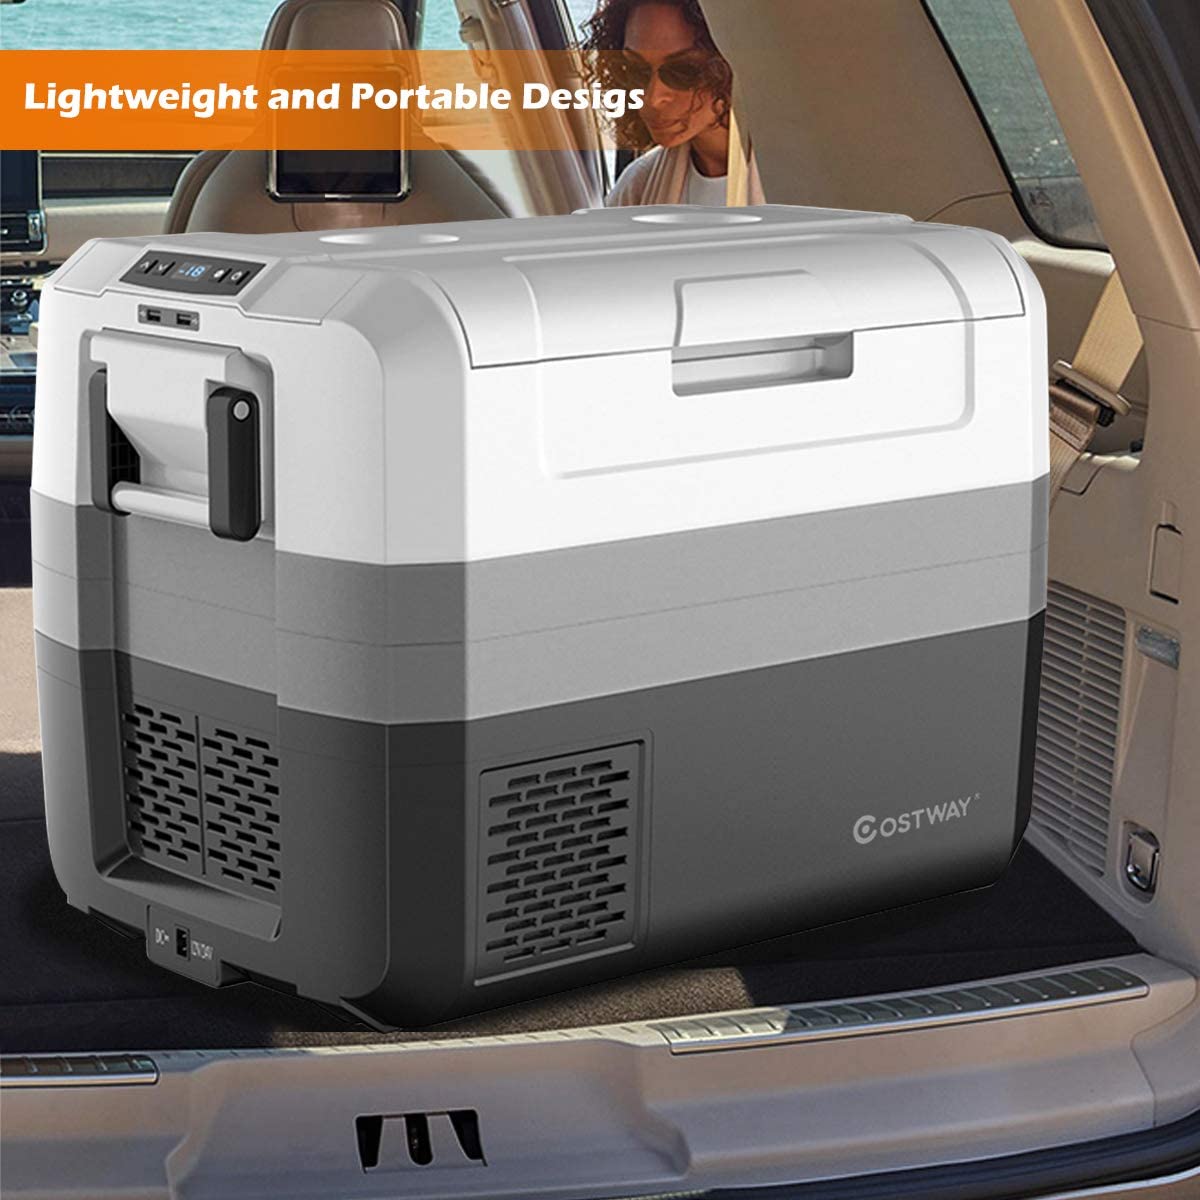 Chairliving 58 Quart Portable Car Refrigerator Electric Camping Car Cooler Fridge Compact RV Freezer with Two-Way Open Door and Operating Panel